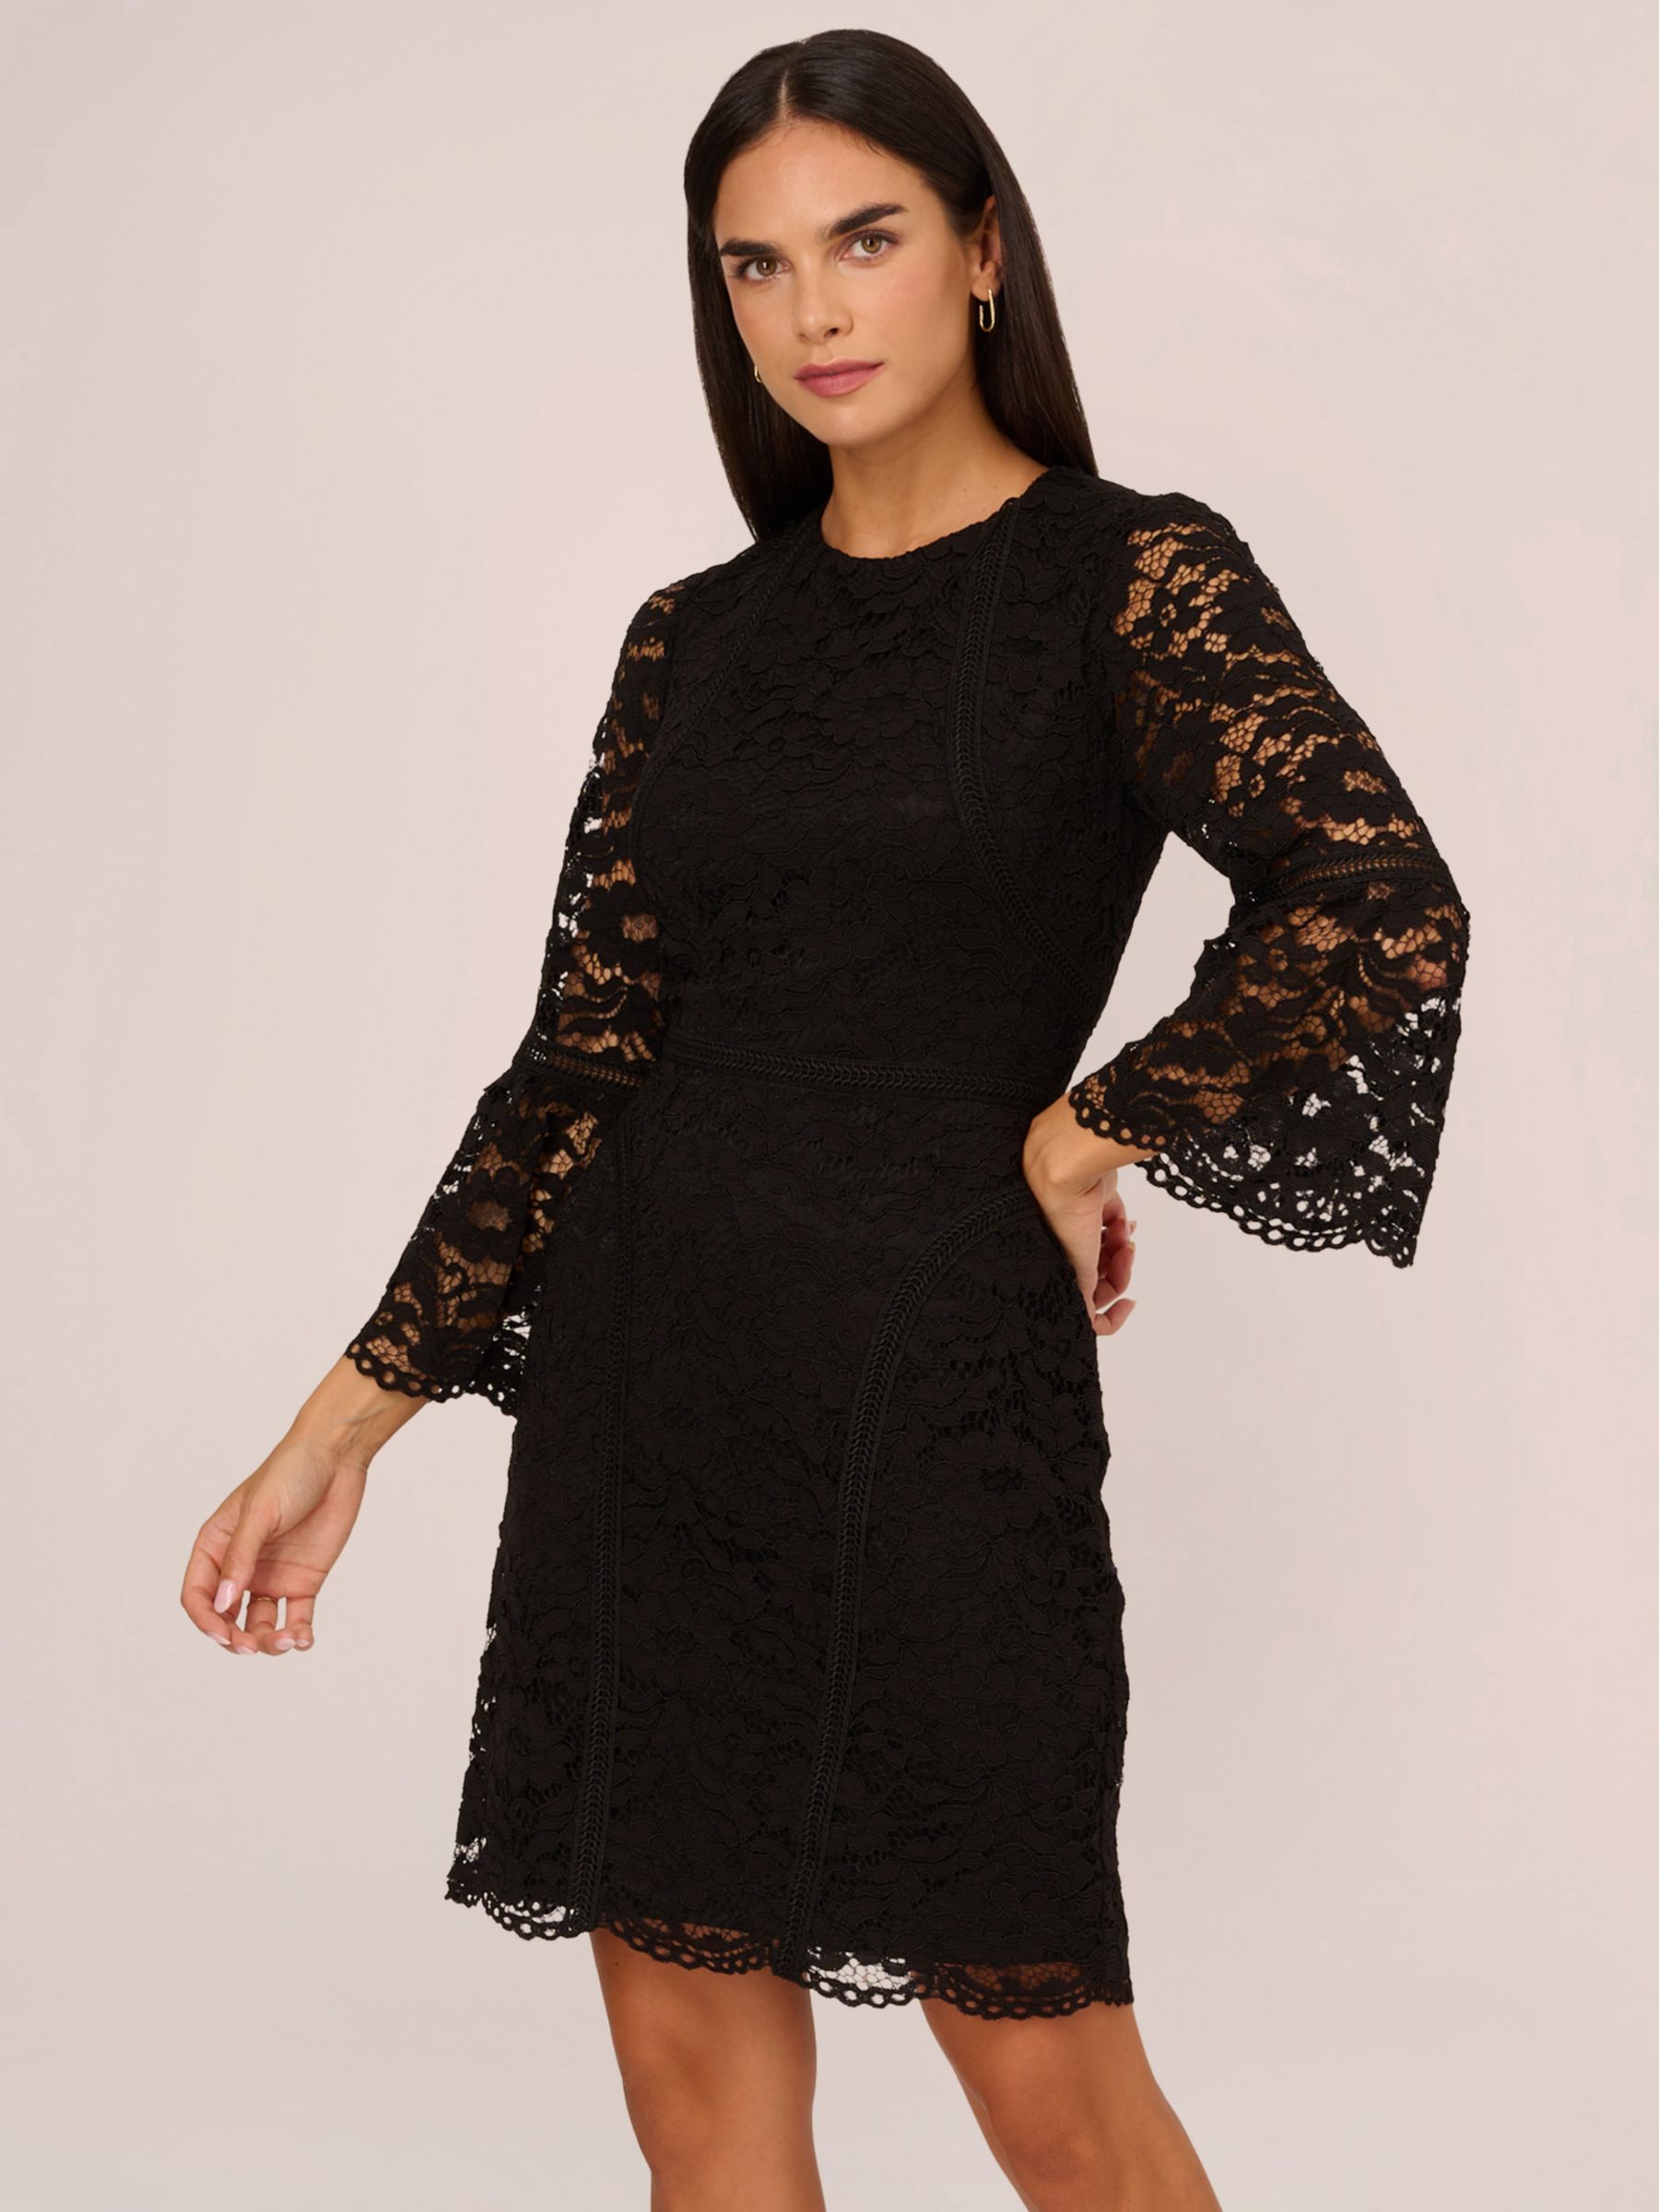 Adrianna Papell Lace Short Dress, Black at John Lewis & Partners